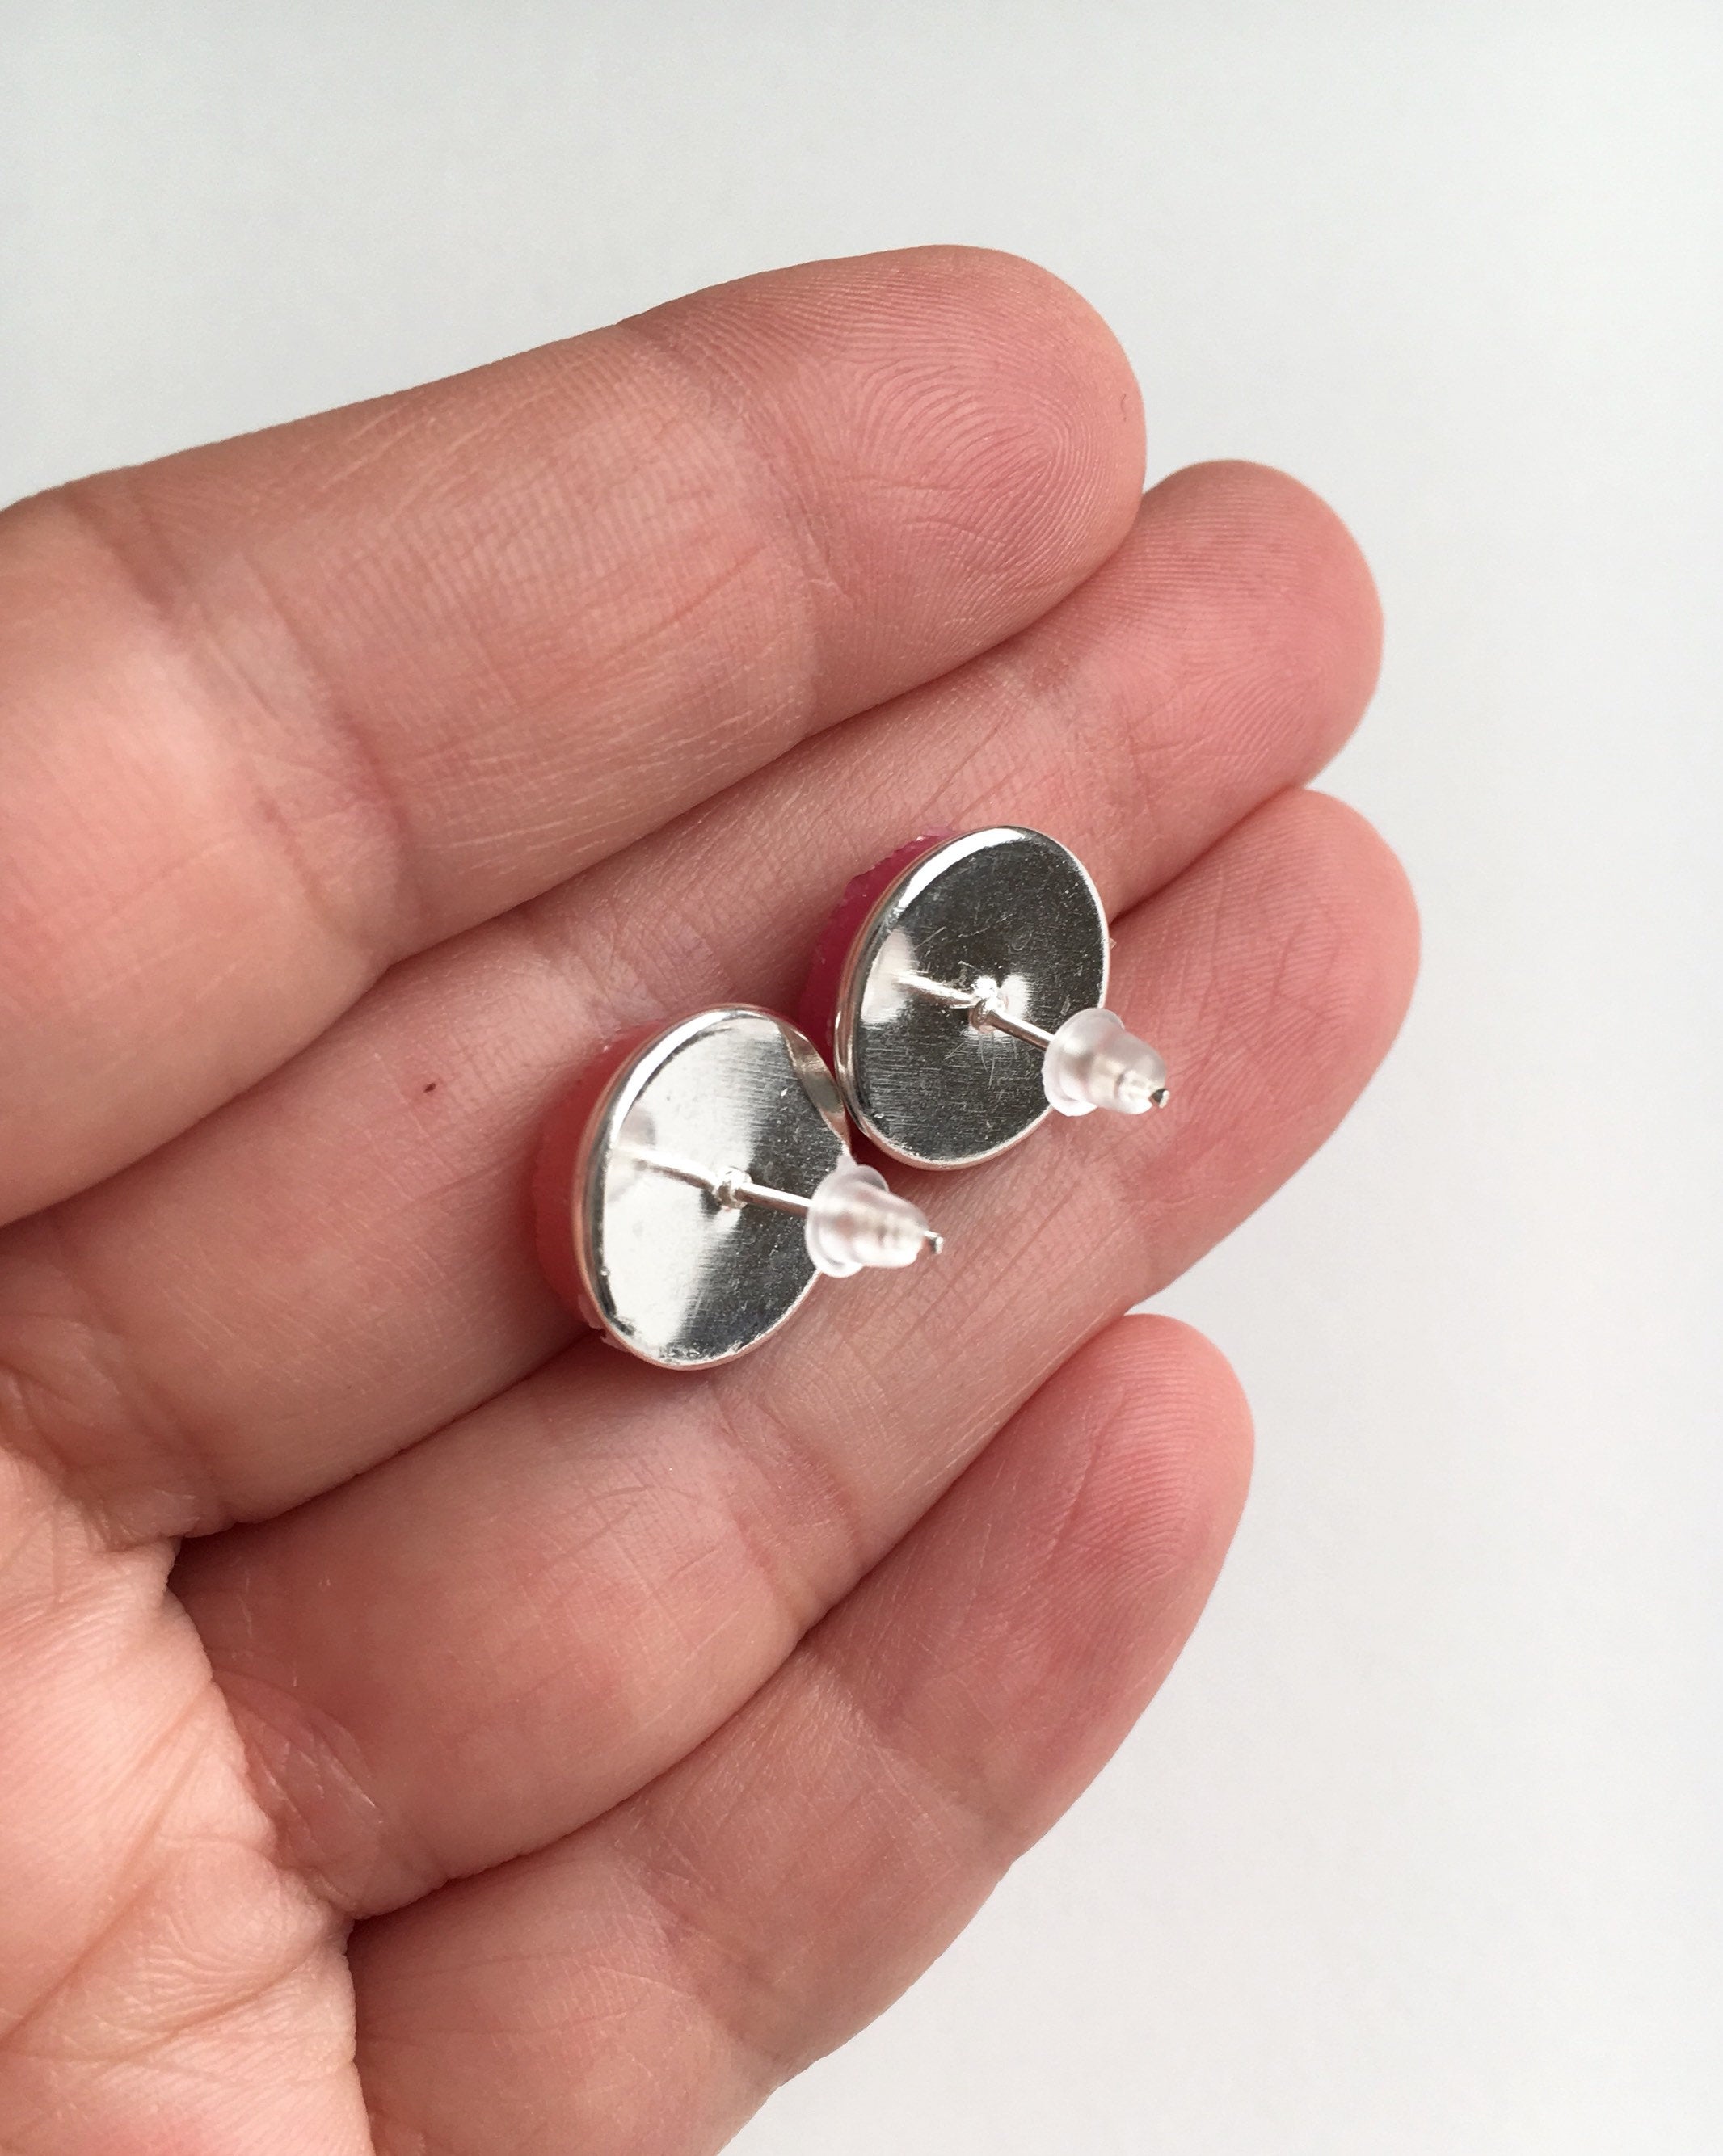 Hand holding stud earrings showing the back with rubber push backs.